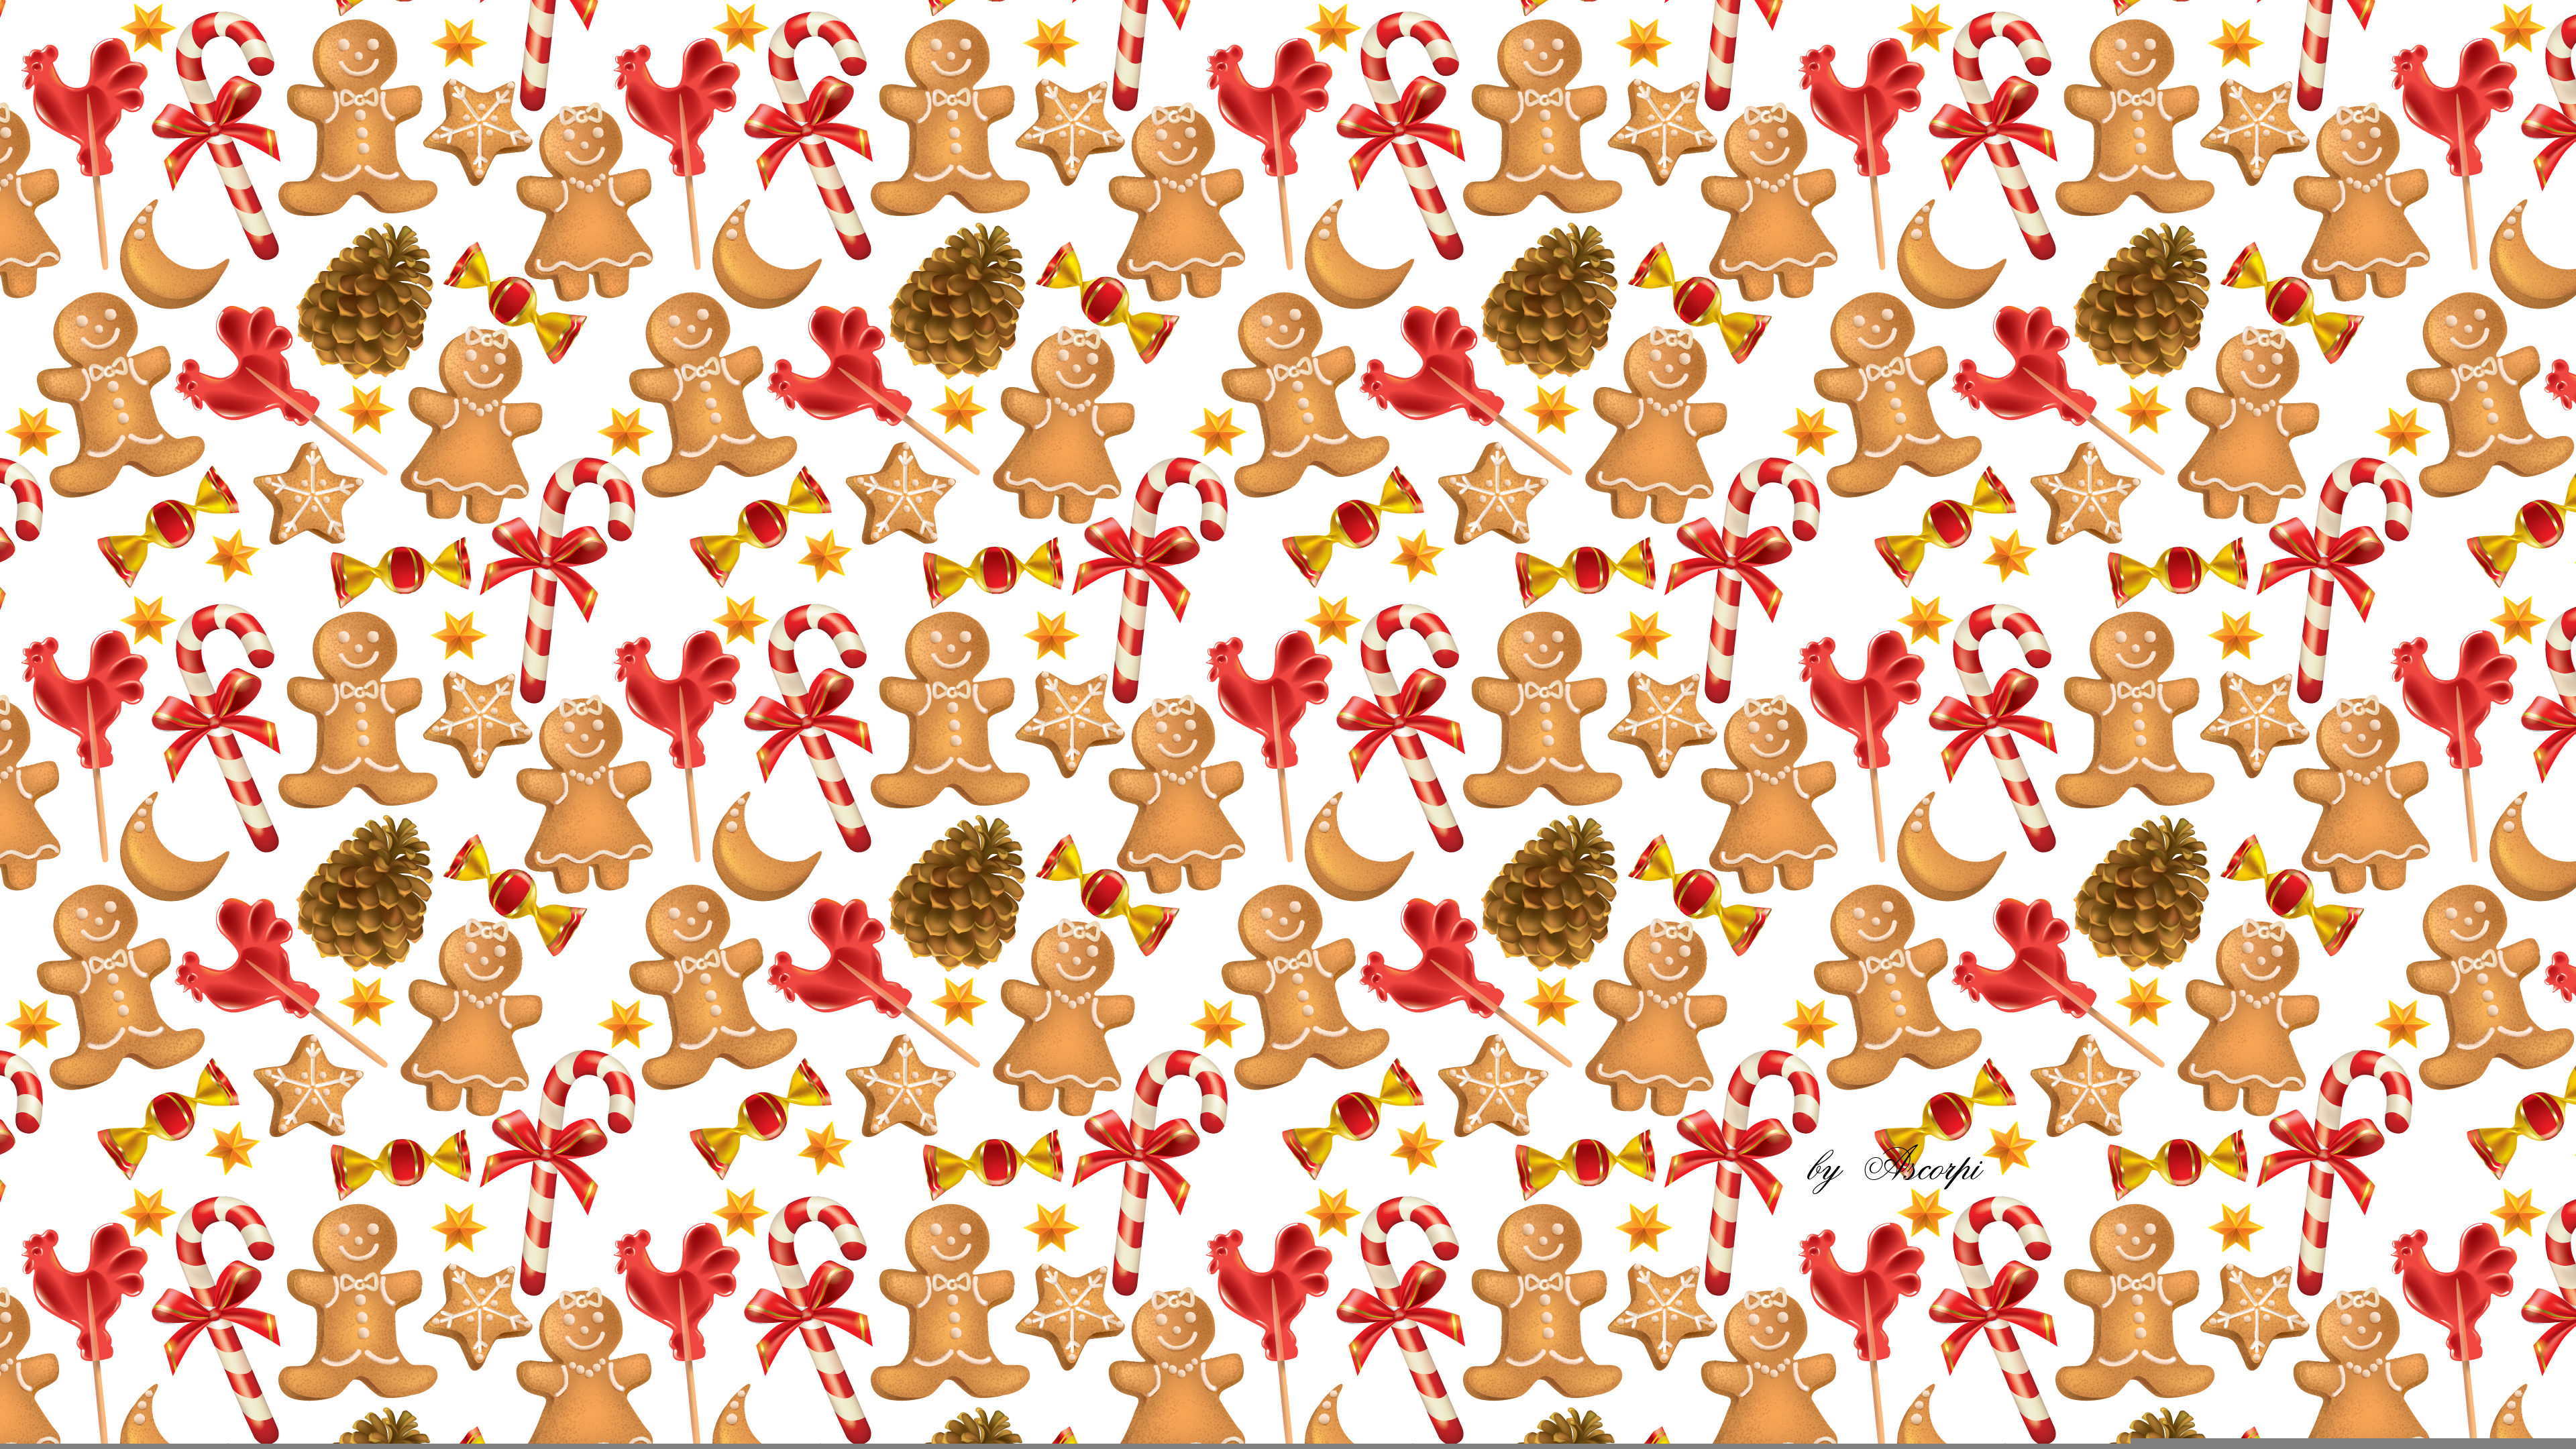 Gingerbread Man Seamless Pattern Cute Vector Background For New Years  Day Christmas Winter Holiday Illustration 61229872  Megapixl